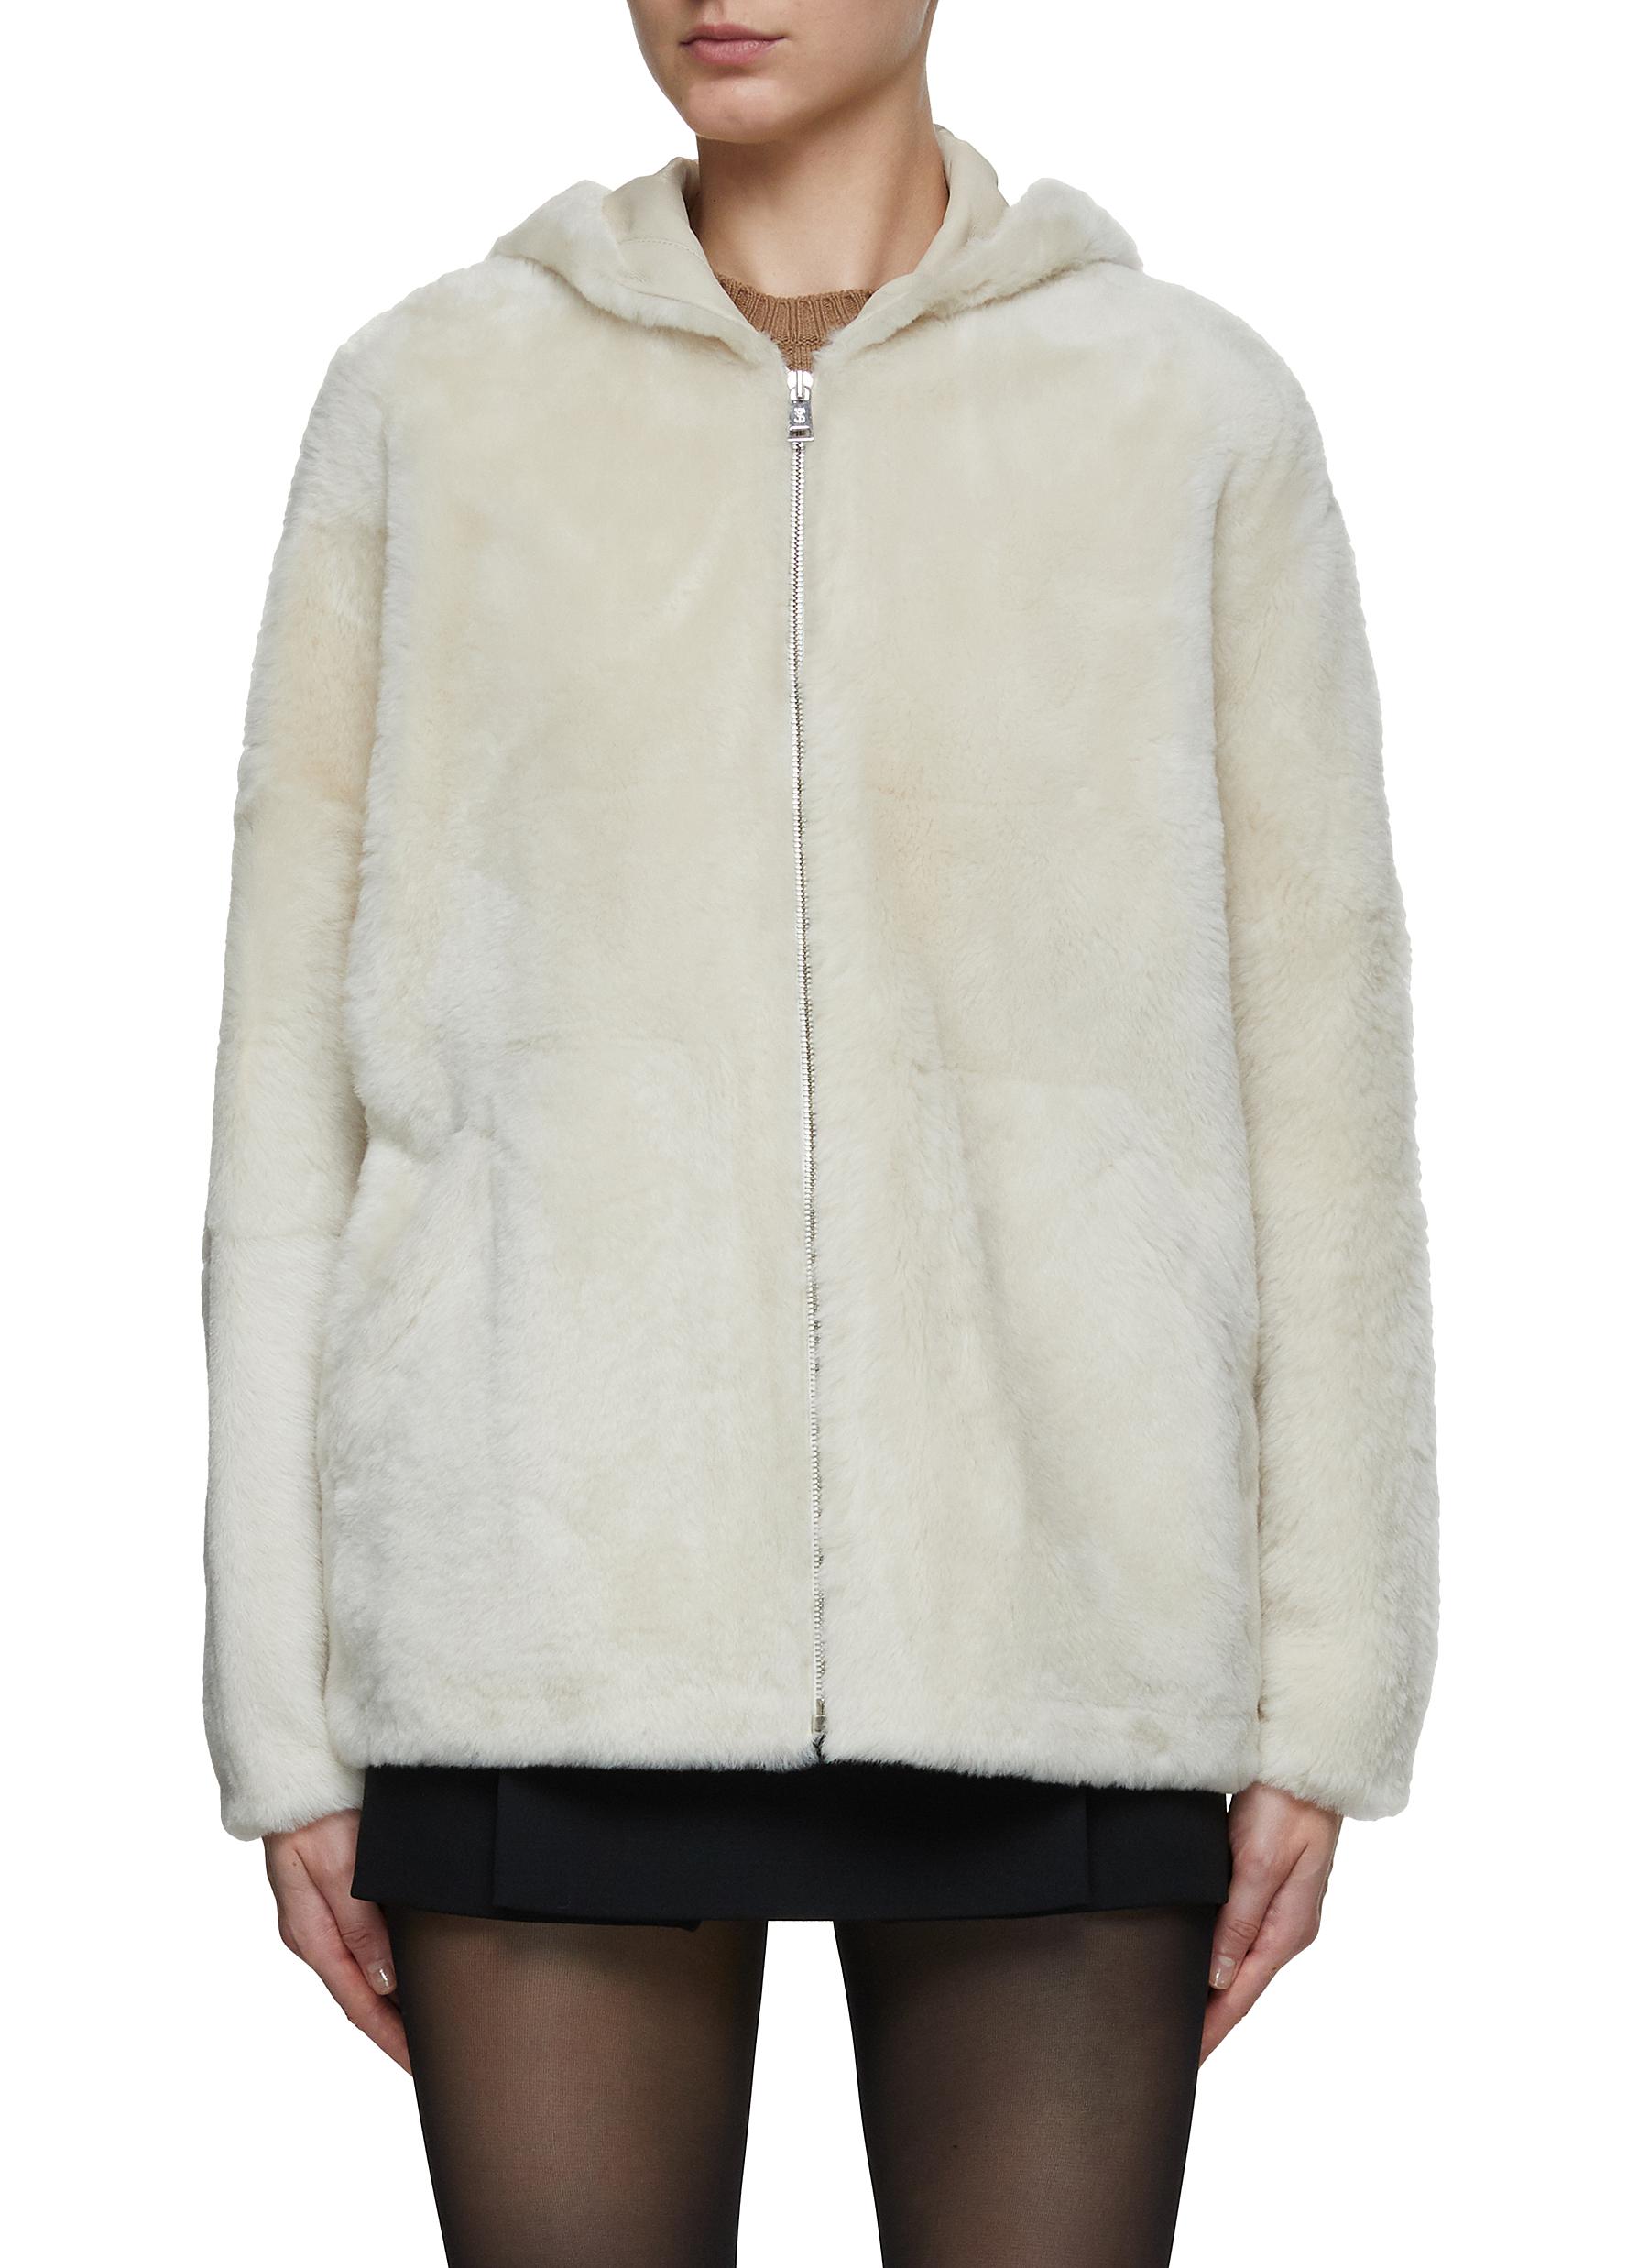 This Balenciaga Shearling Jacket Comes with All the Bragging